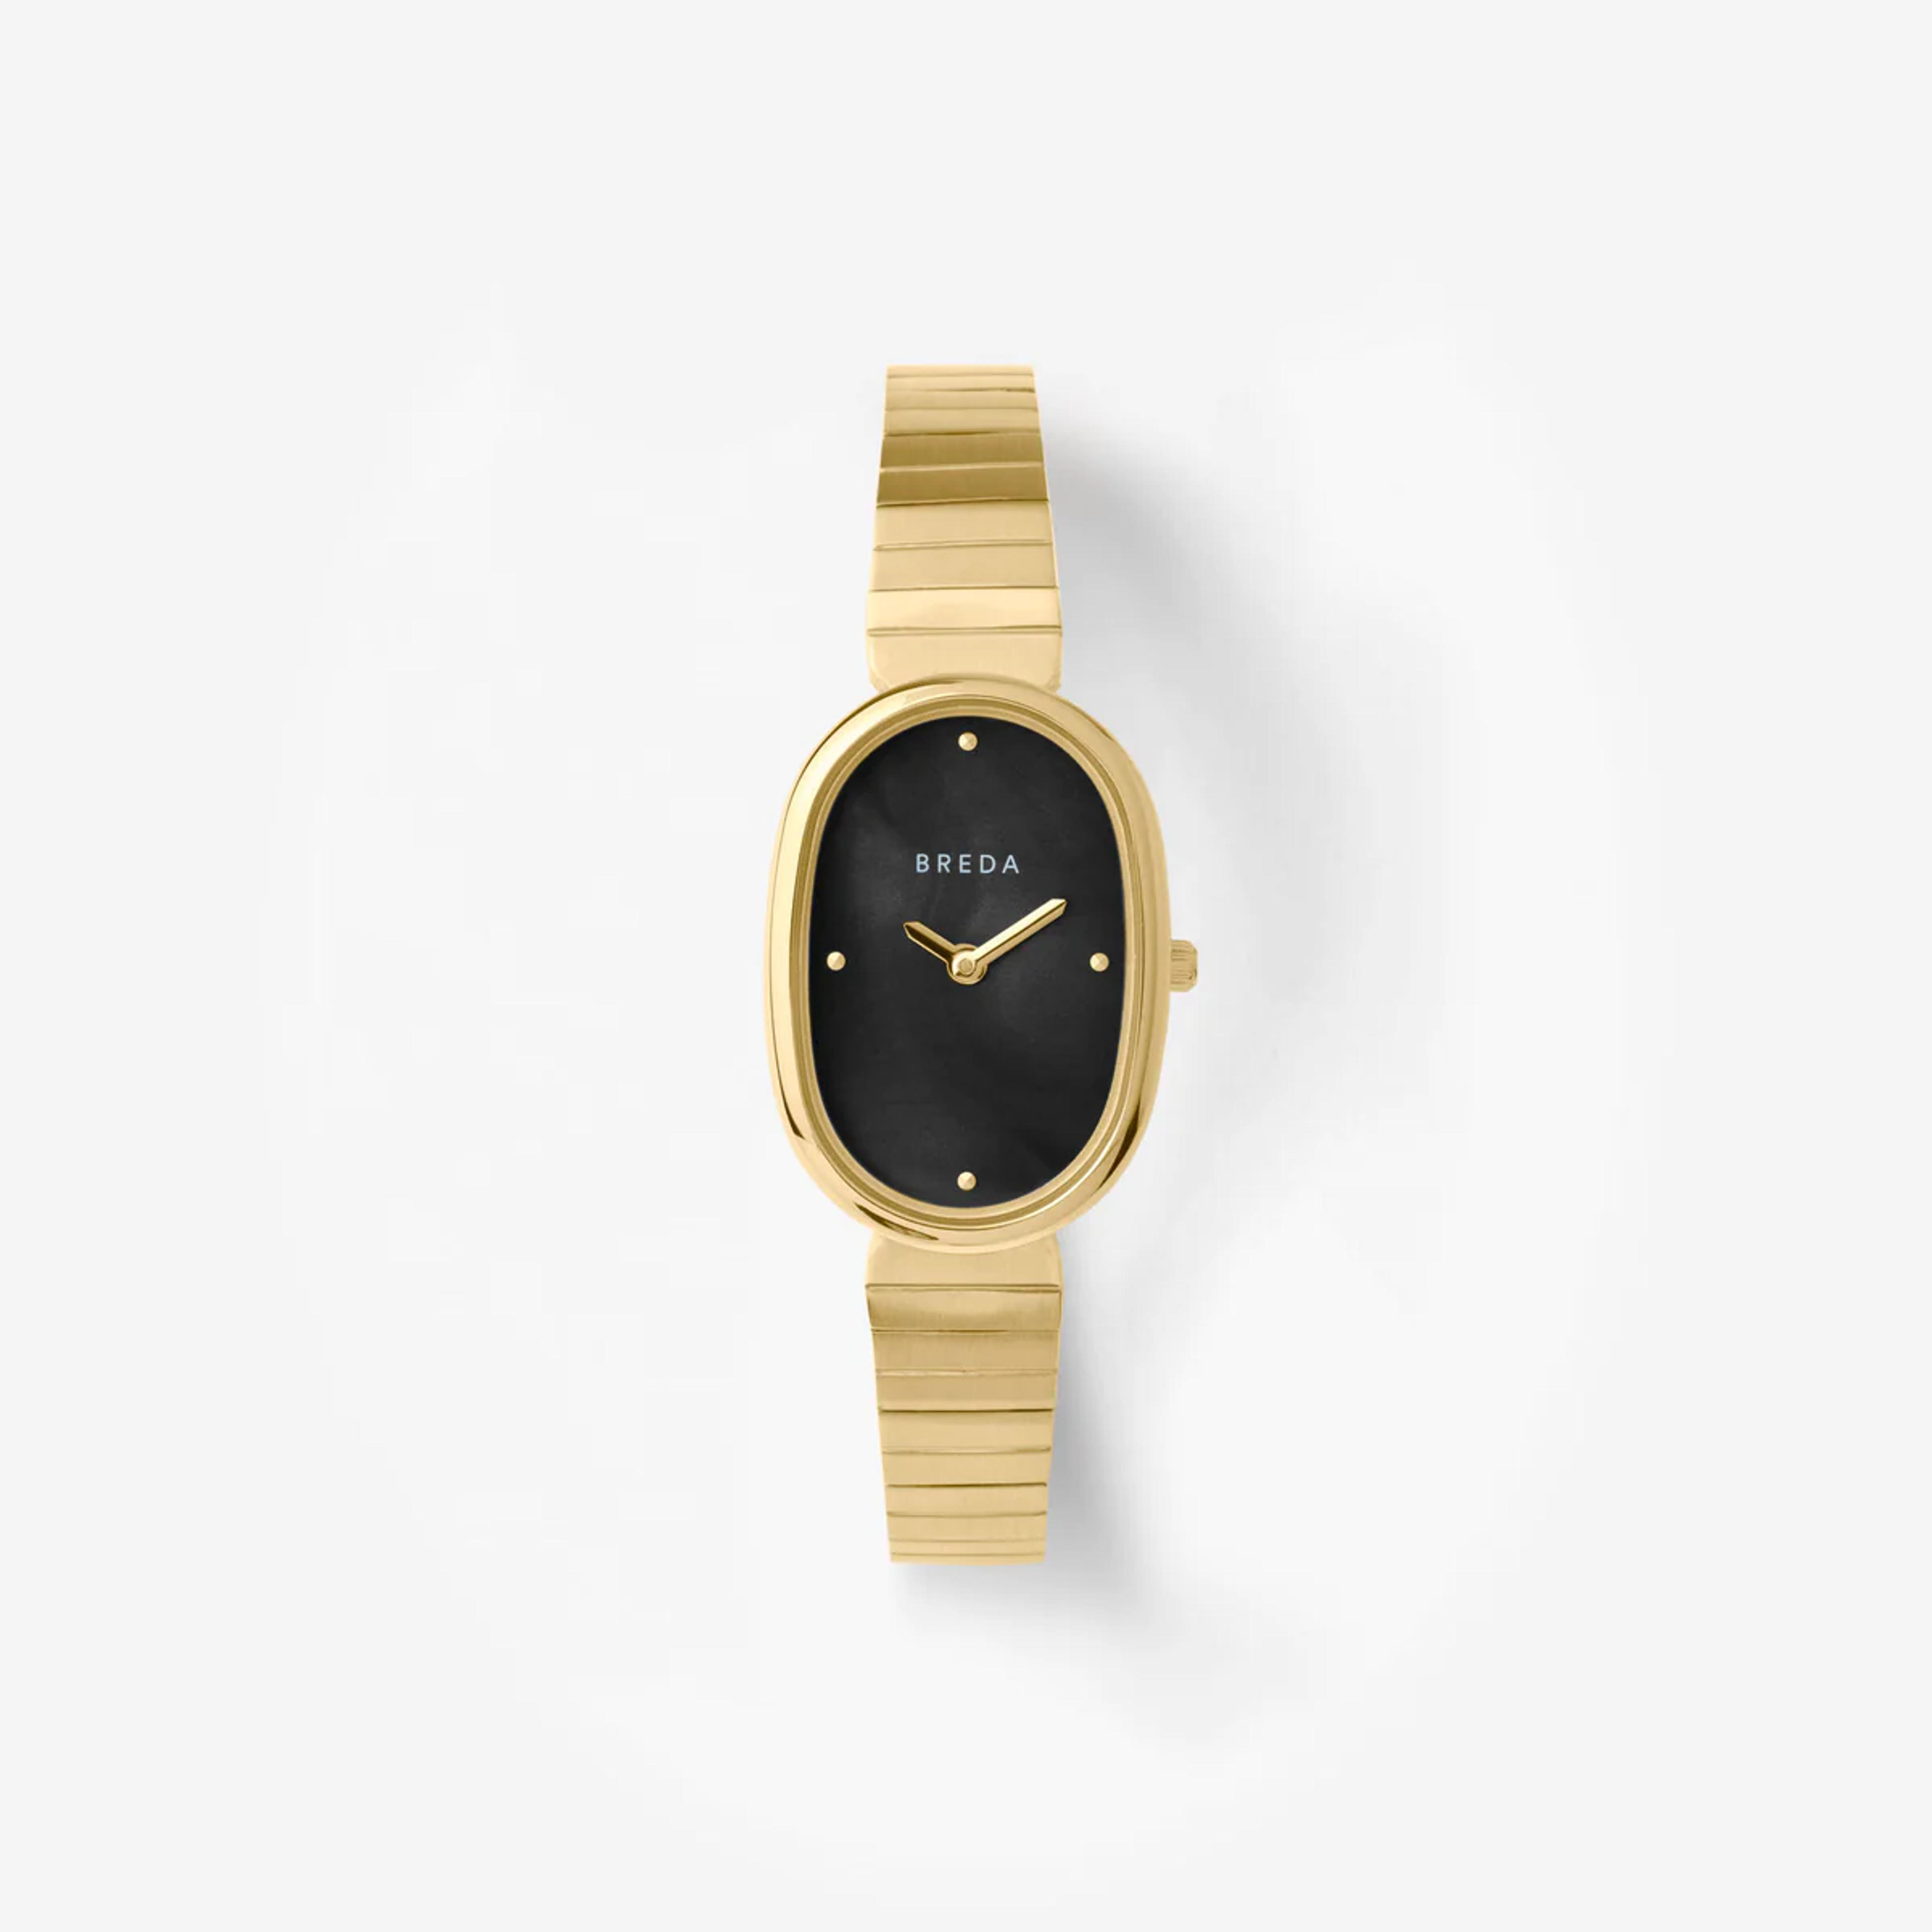 Jane | Metal Oval Watch | 23mm Oval Case | Midnight Black Mother Of Pearl Dial & Gold-Plated Stainless Steel Bracelet | BREDA Watch